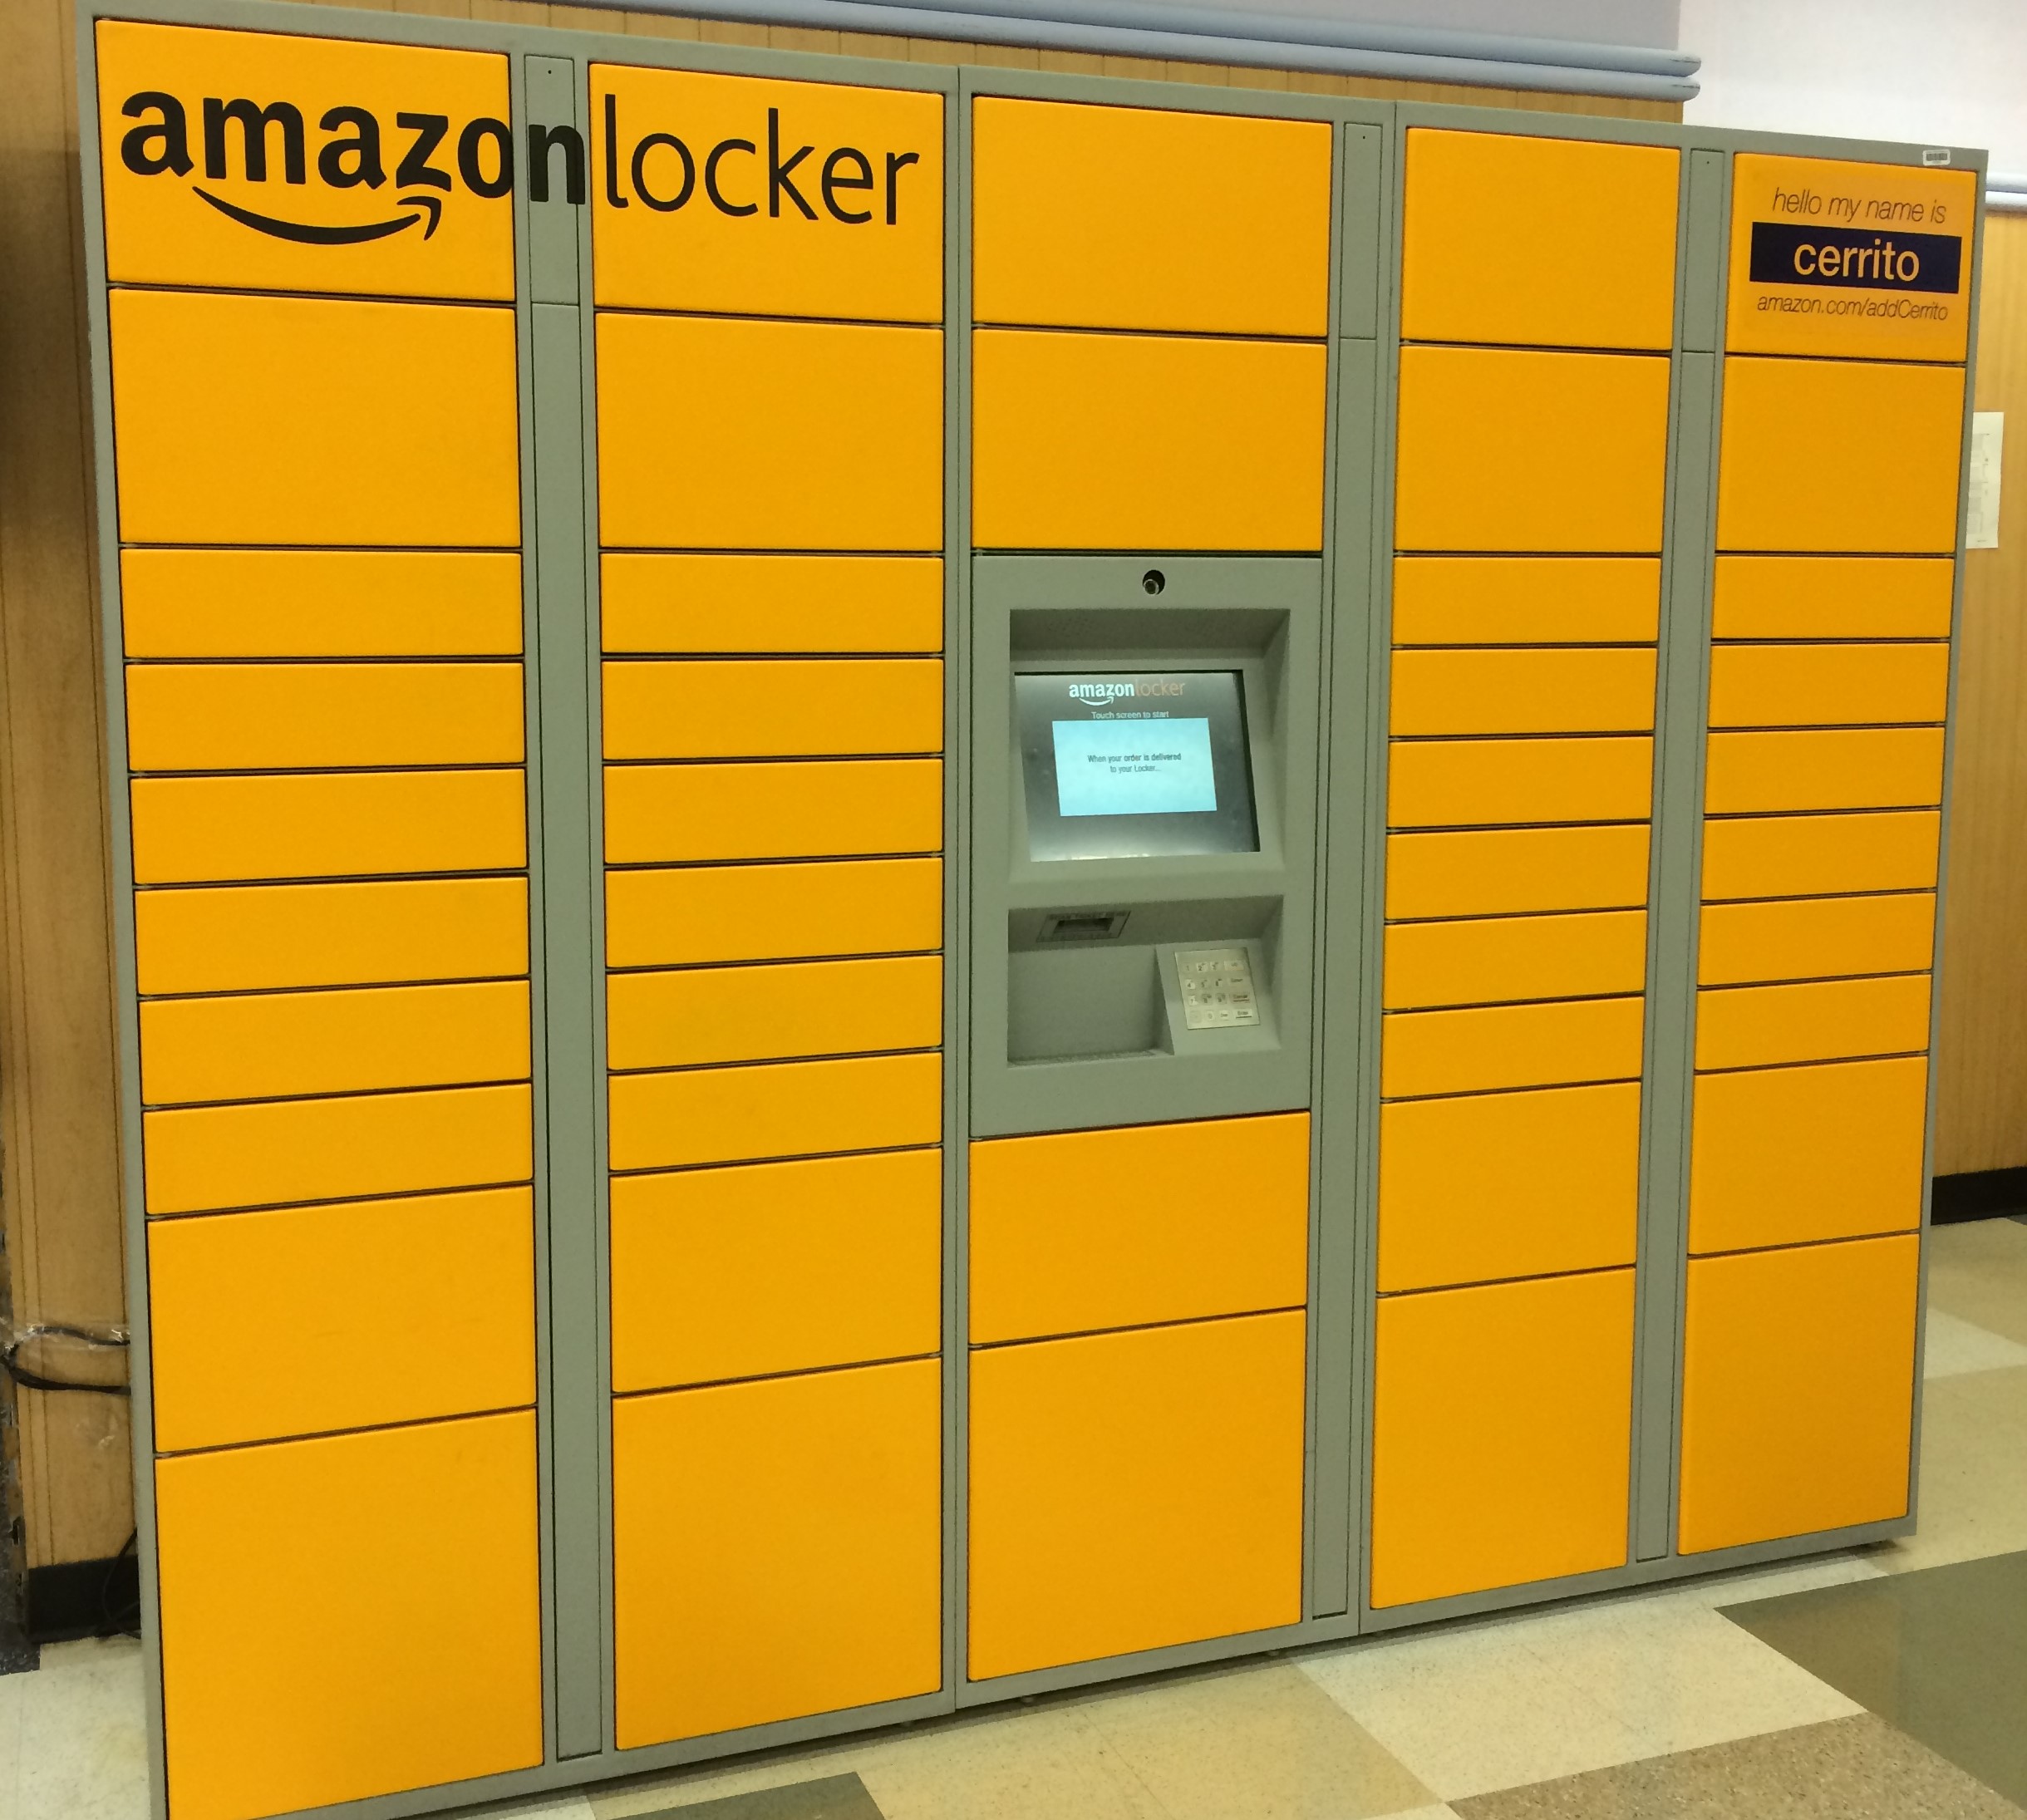 Amazon parcel lockers – what’s in it for Newsagents?